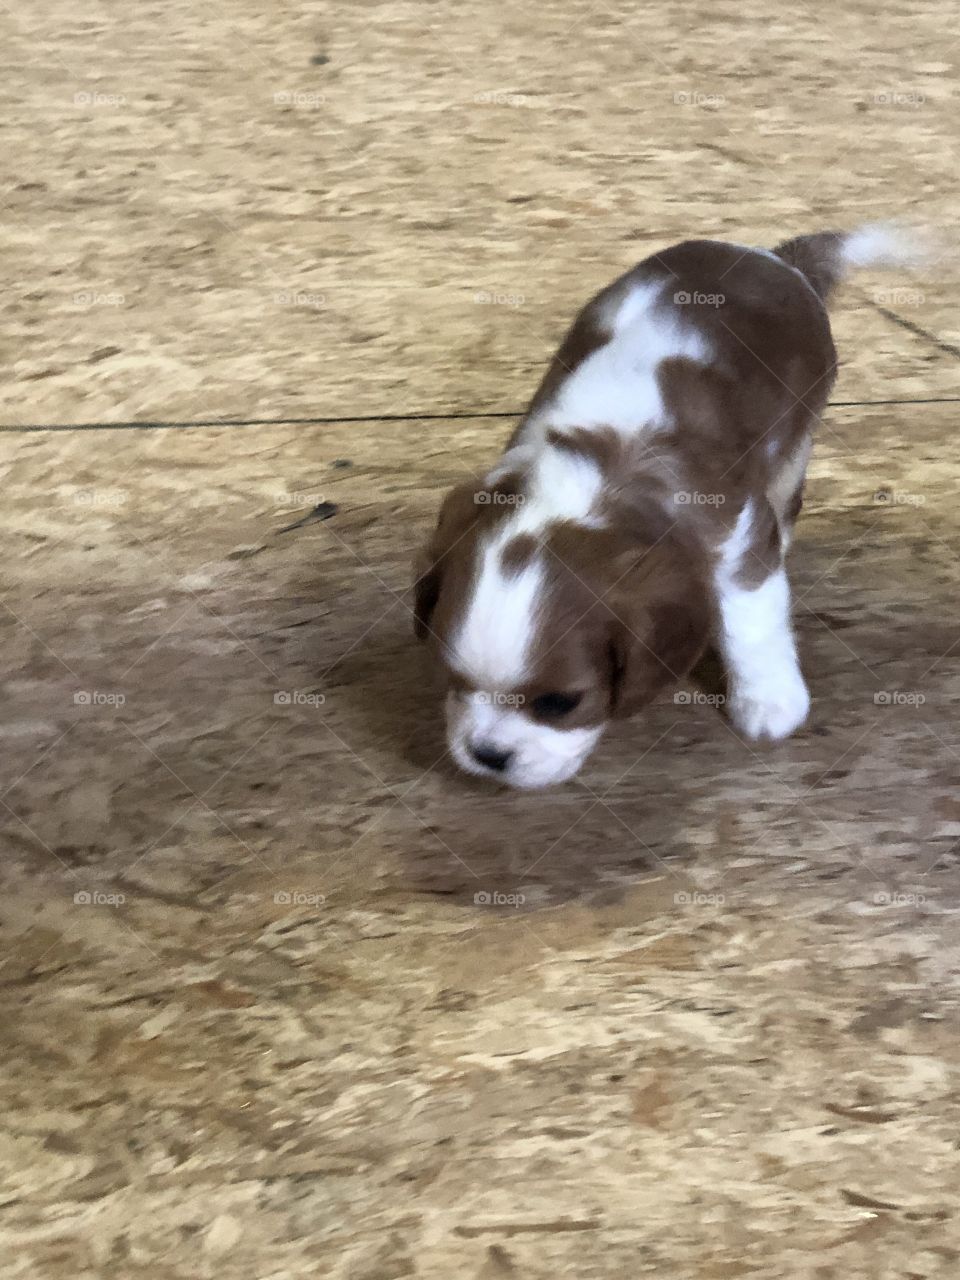 Adorable cavalier King Charles puppy